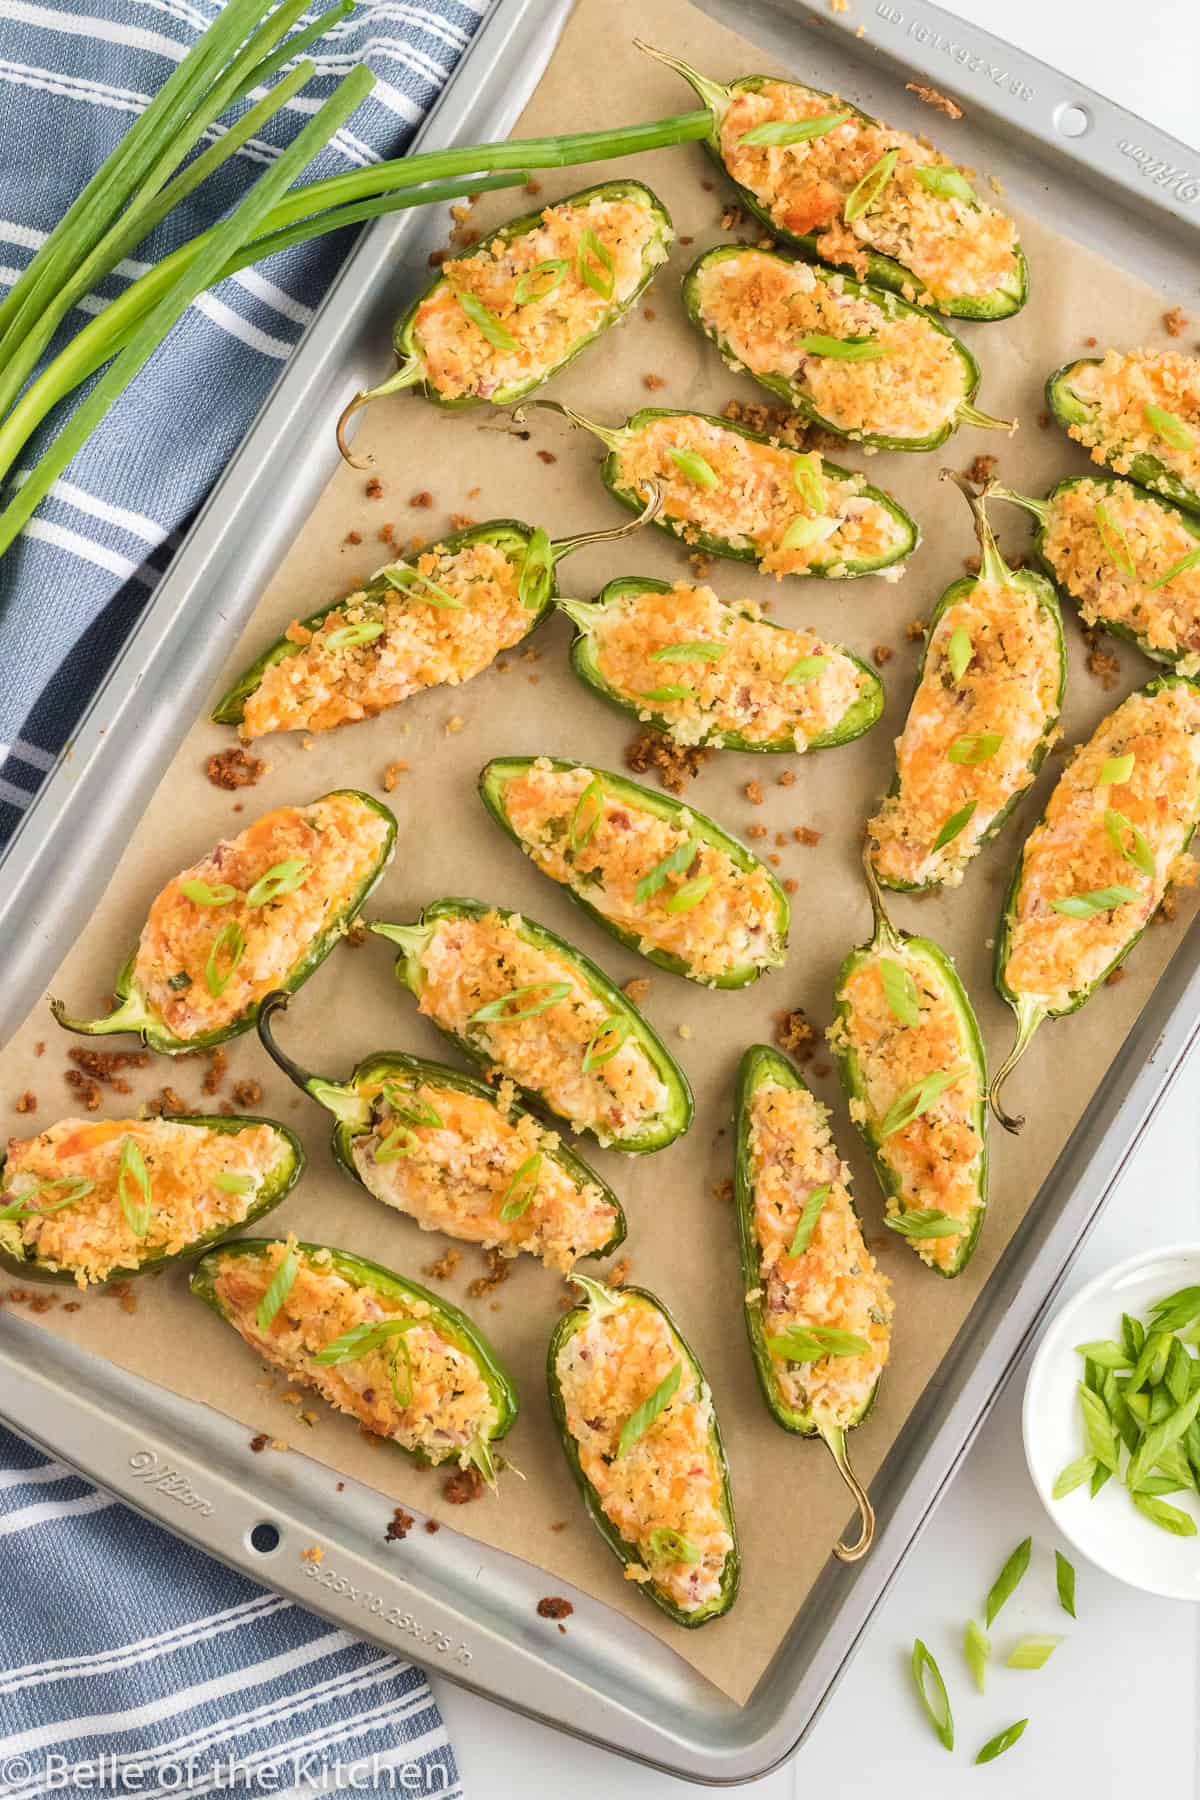 cream cheese stuffed peppers on a sheet pan